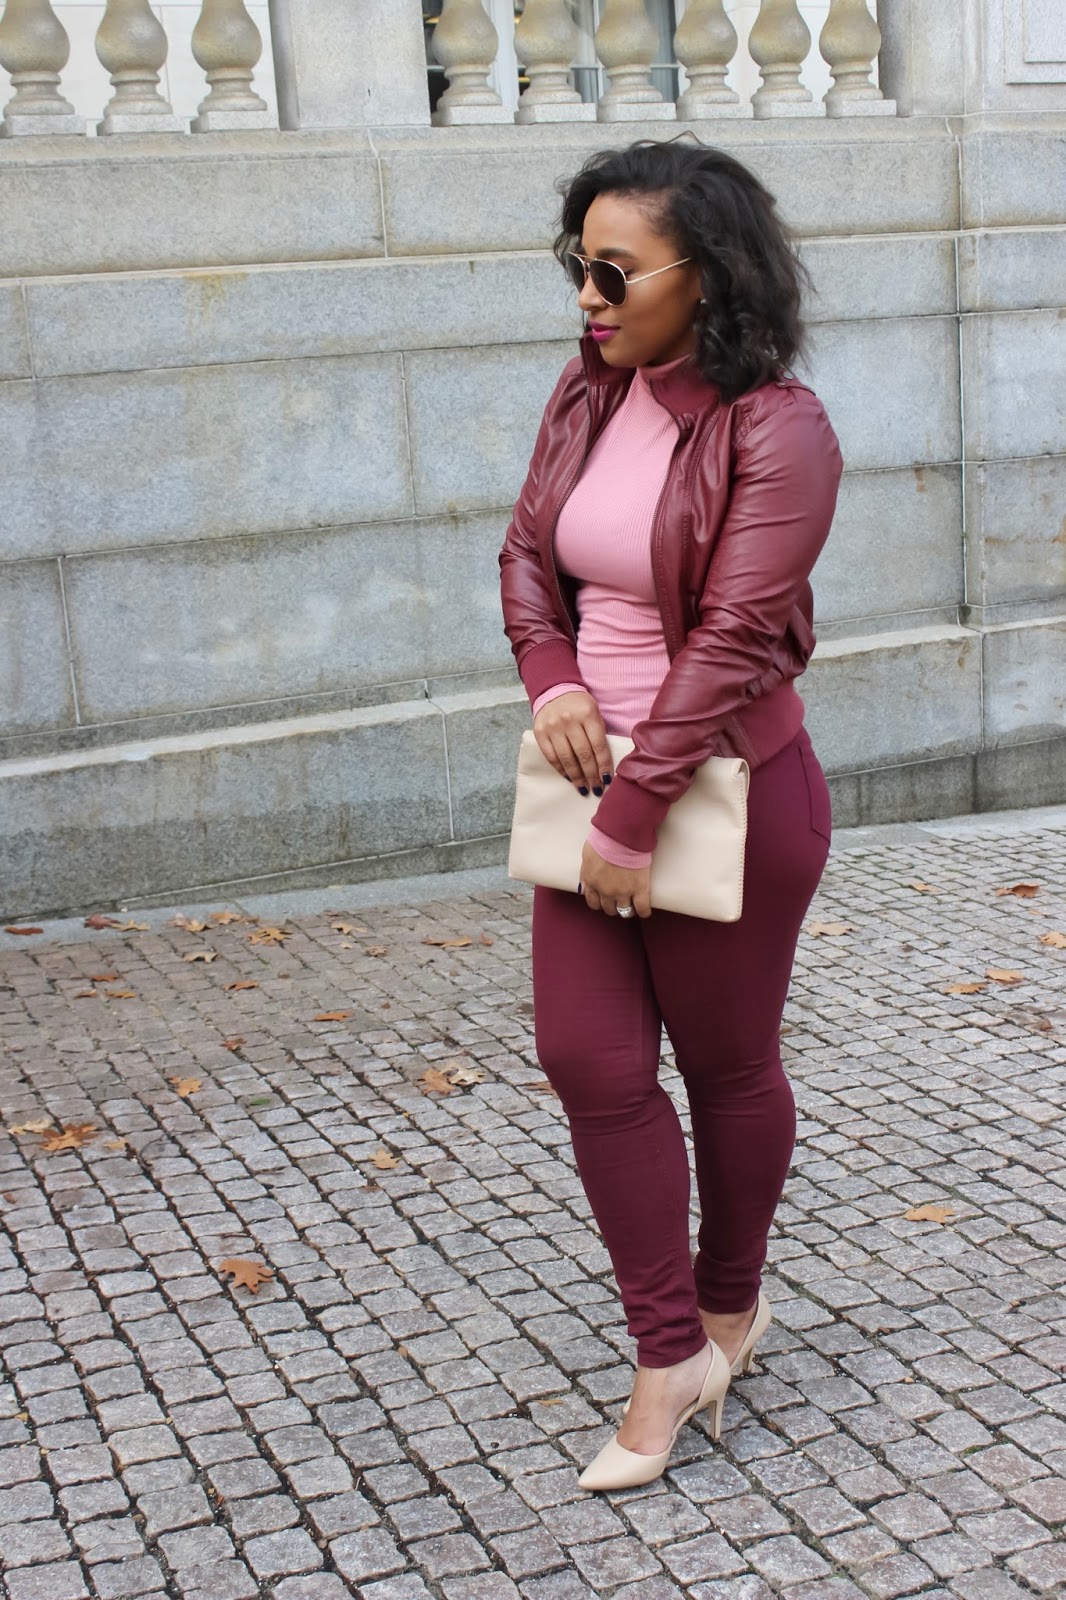 monochrome, pink outfit, the monochrome trend, how to wear monochrome, monochrome outfits